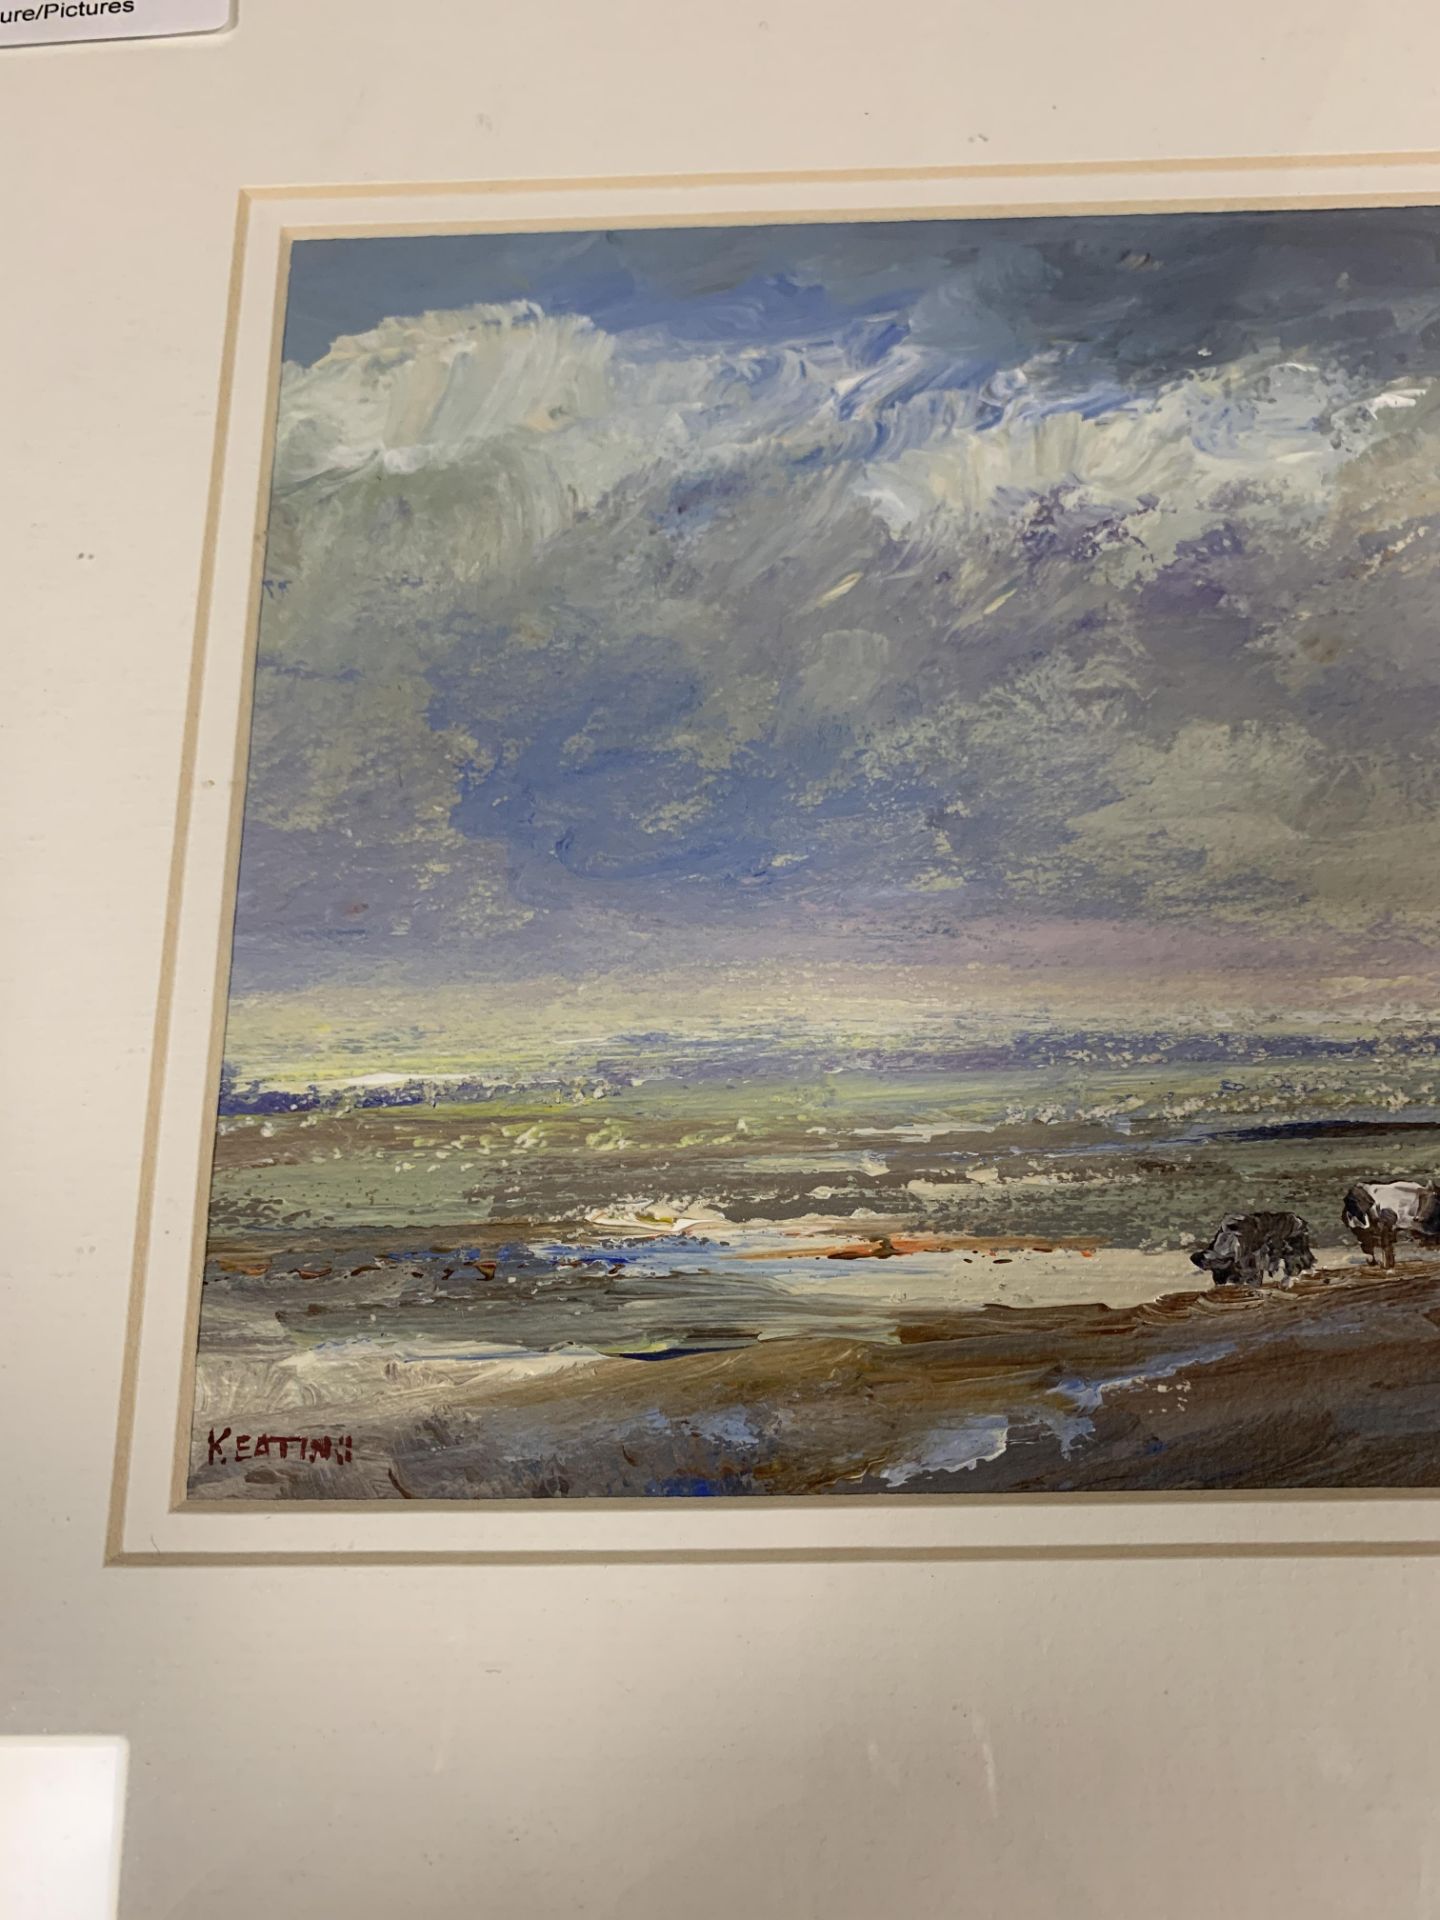 TOM KEATING after John Constable a framed oil painting 'Dedham Vale' 16 x 30cm with a certificate - Image 5 of 12